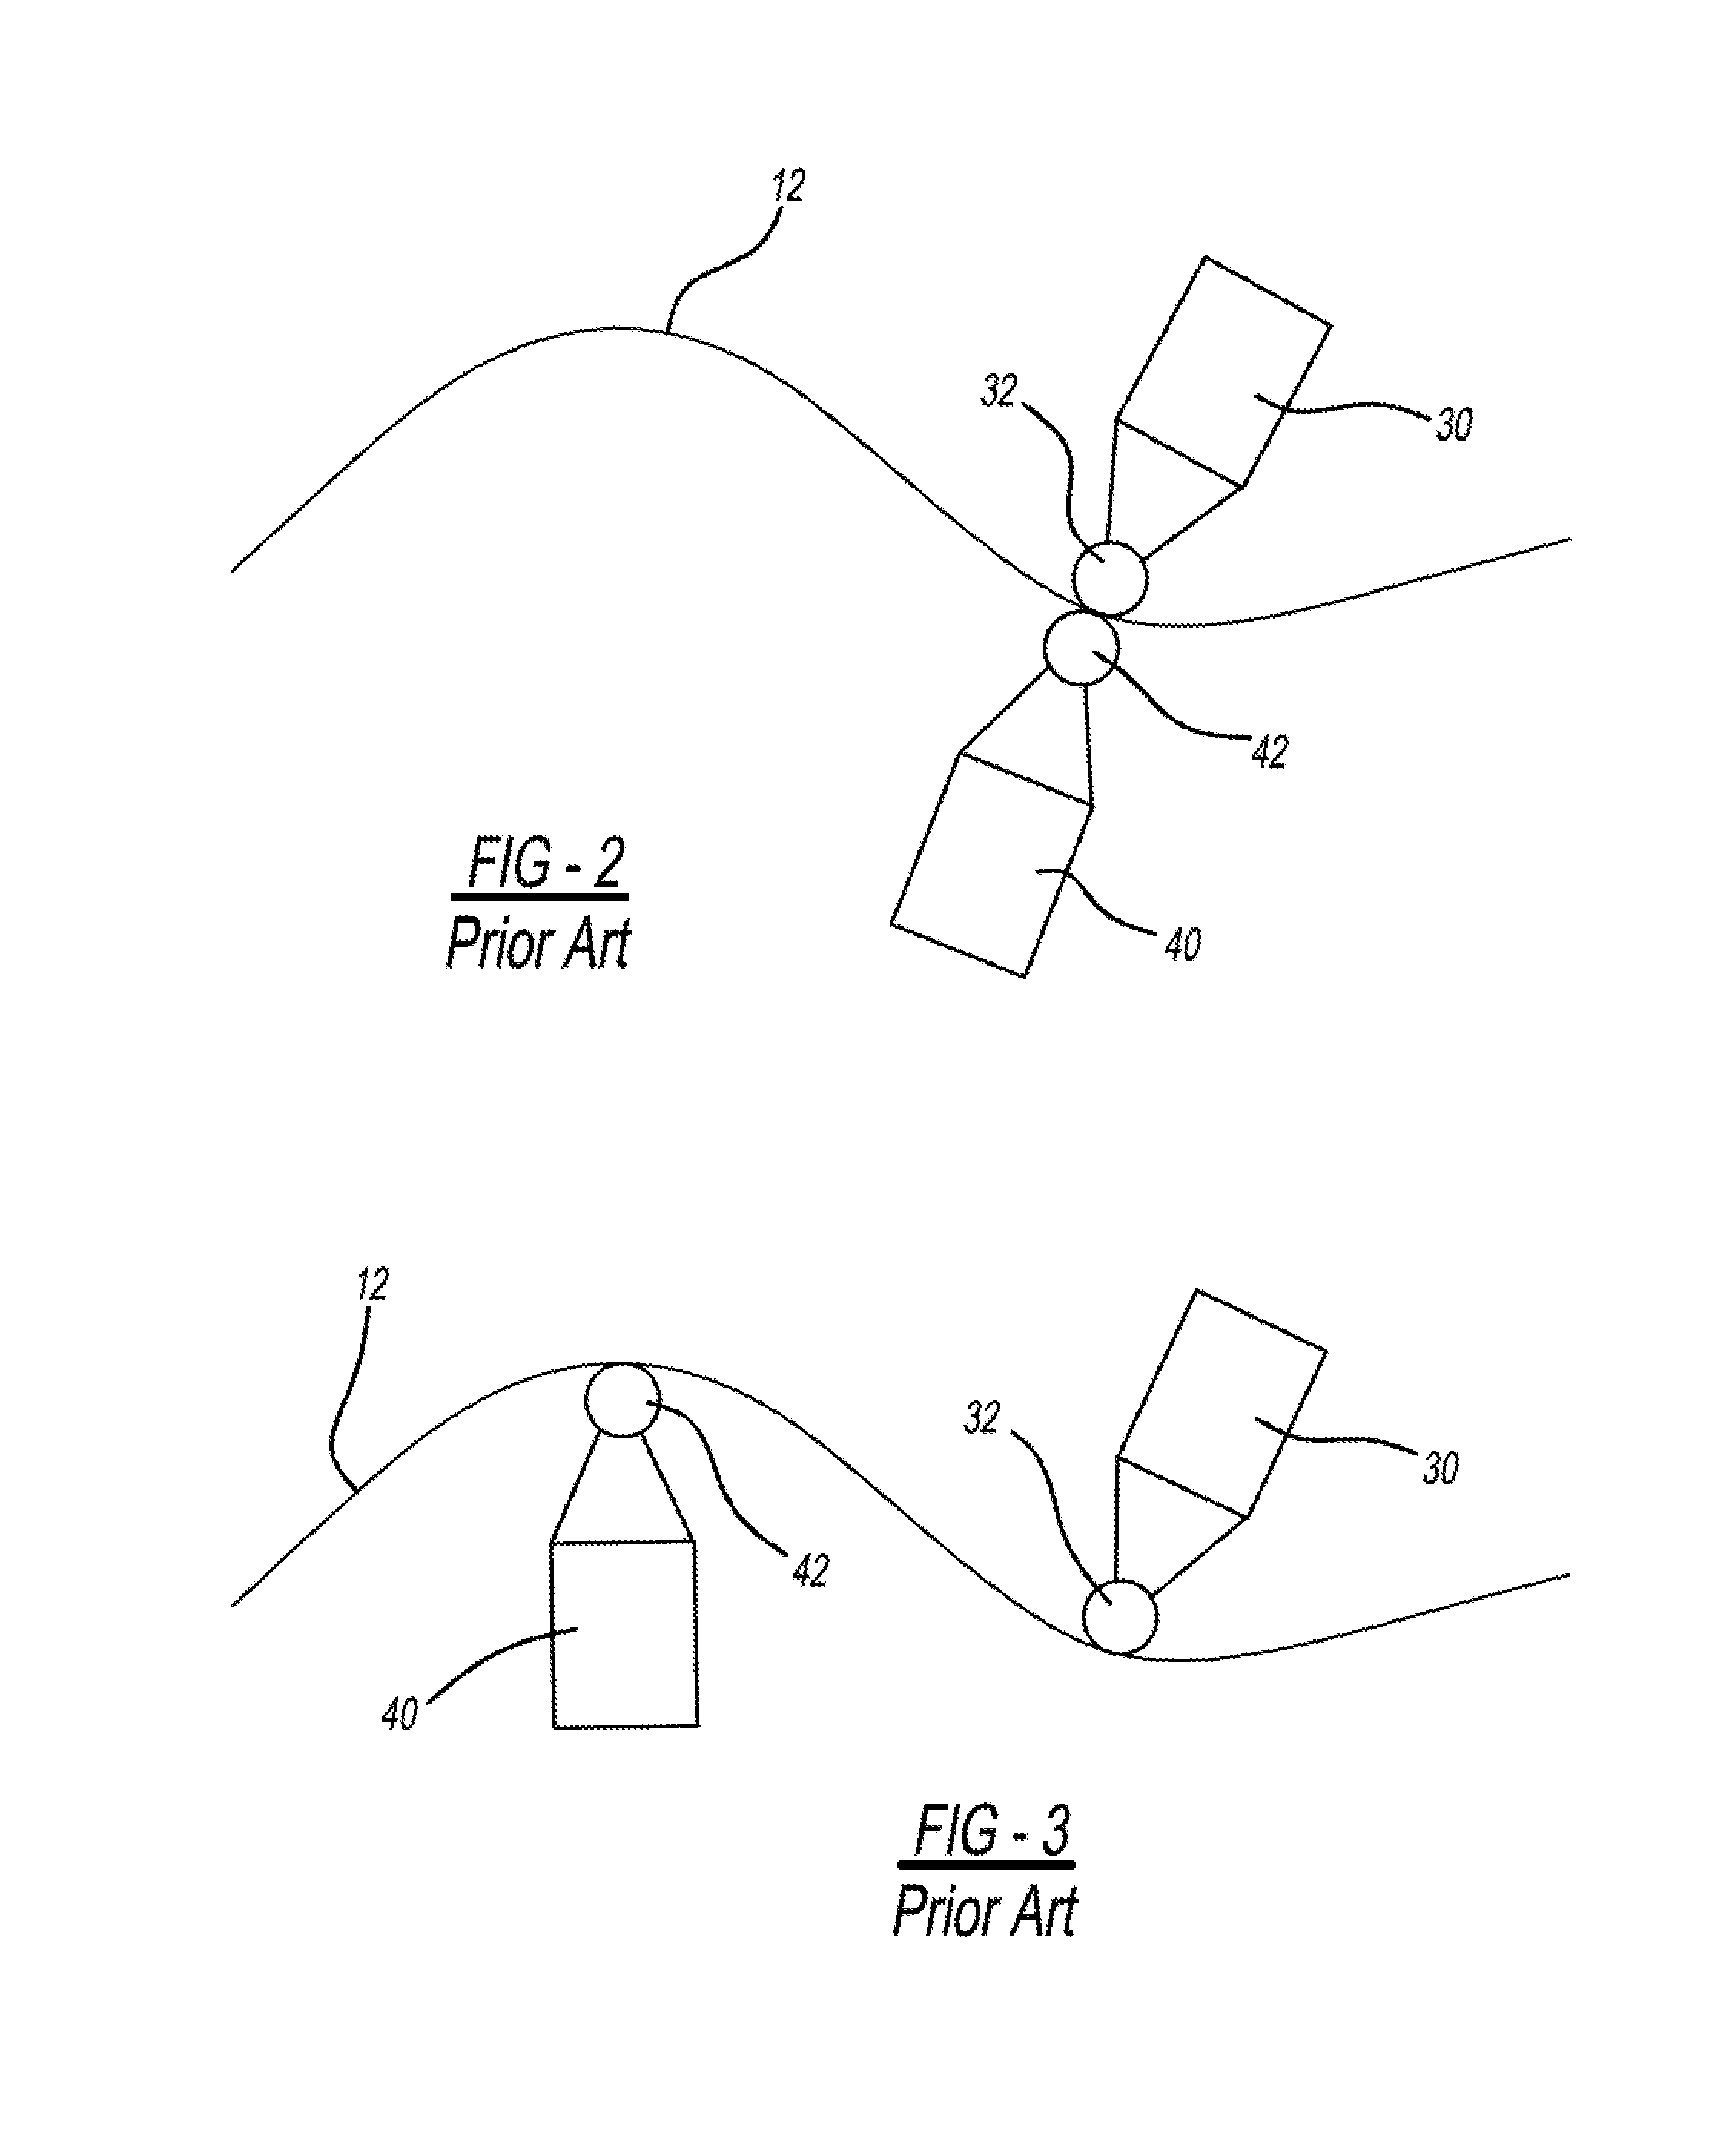 High stiffness and high access forming tool for incremental sheet forming